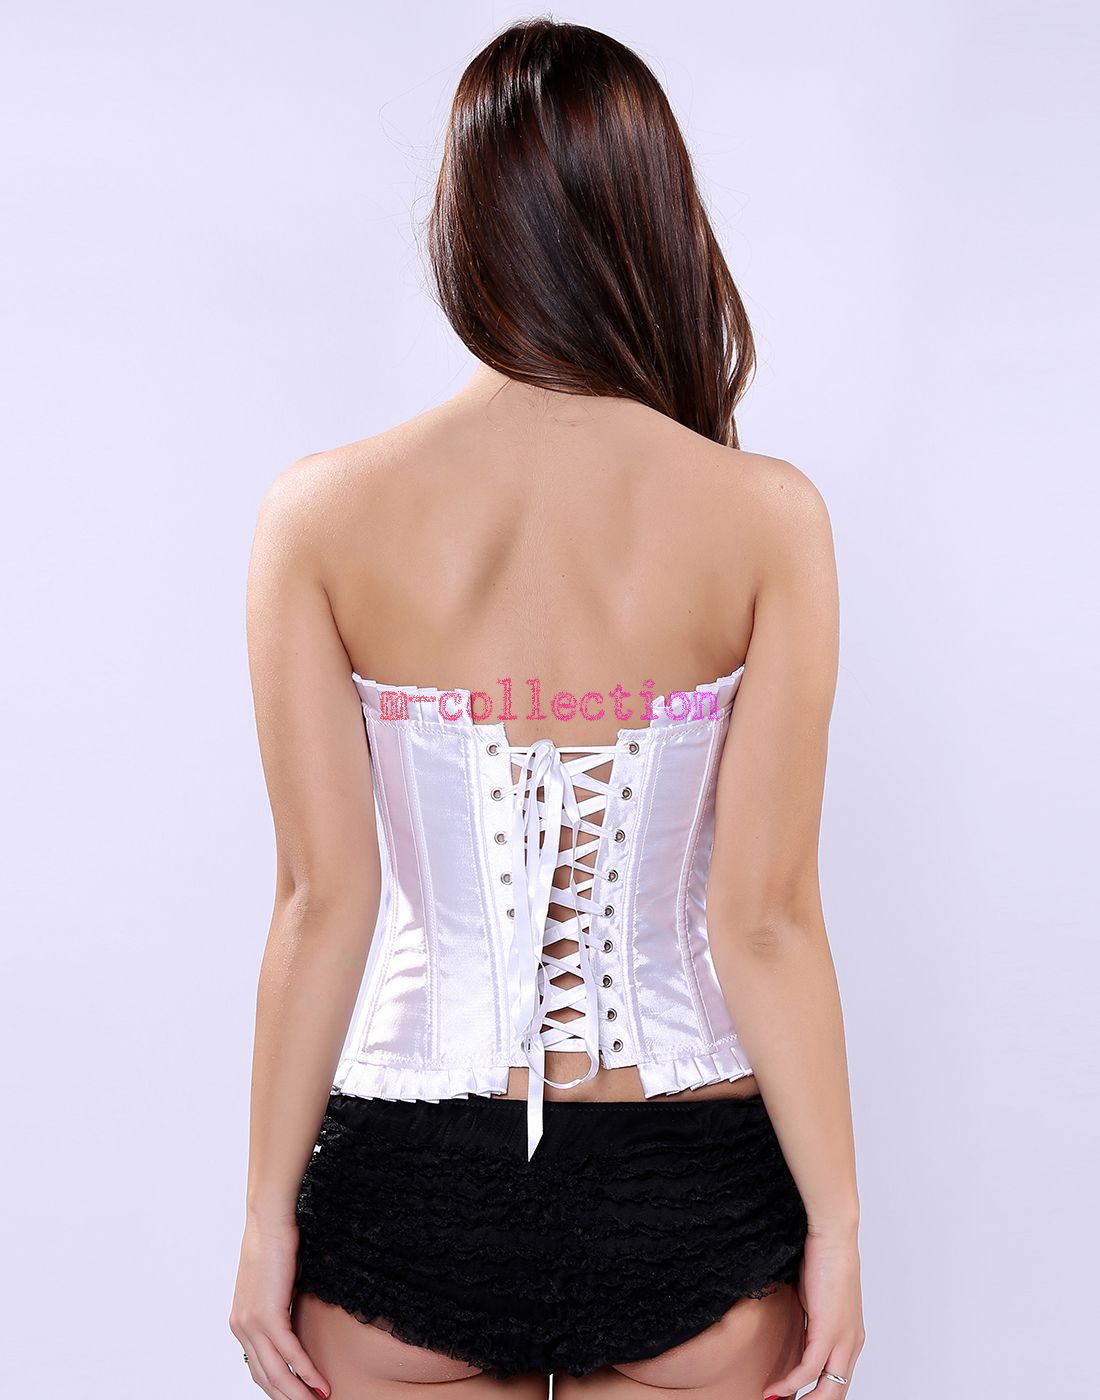 White-Corsets and Bustiers Burlesque Masquerade Tight Lace Corselet Top for Women Sexy Plus Size Push Up Boned Carnival Party Clubwear